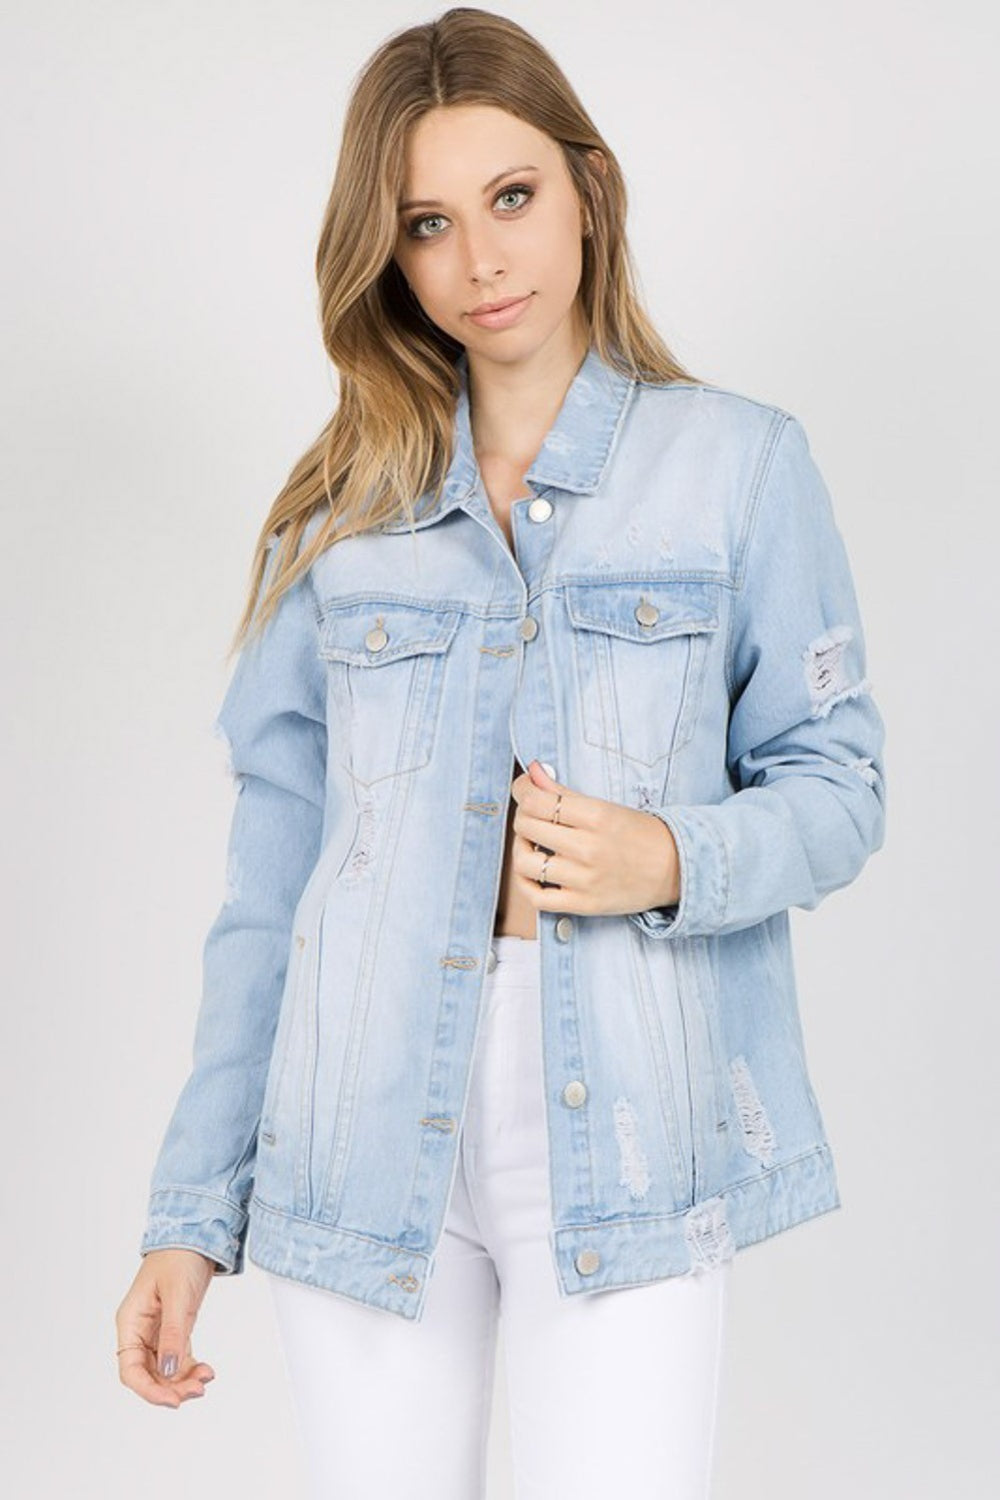 Blue Zone Planet |  American Bazi Letter Patched Distressed Denim Jacket BLUE ZONE PLANET